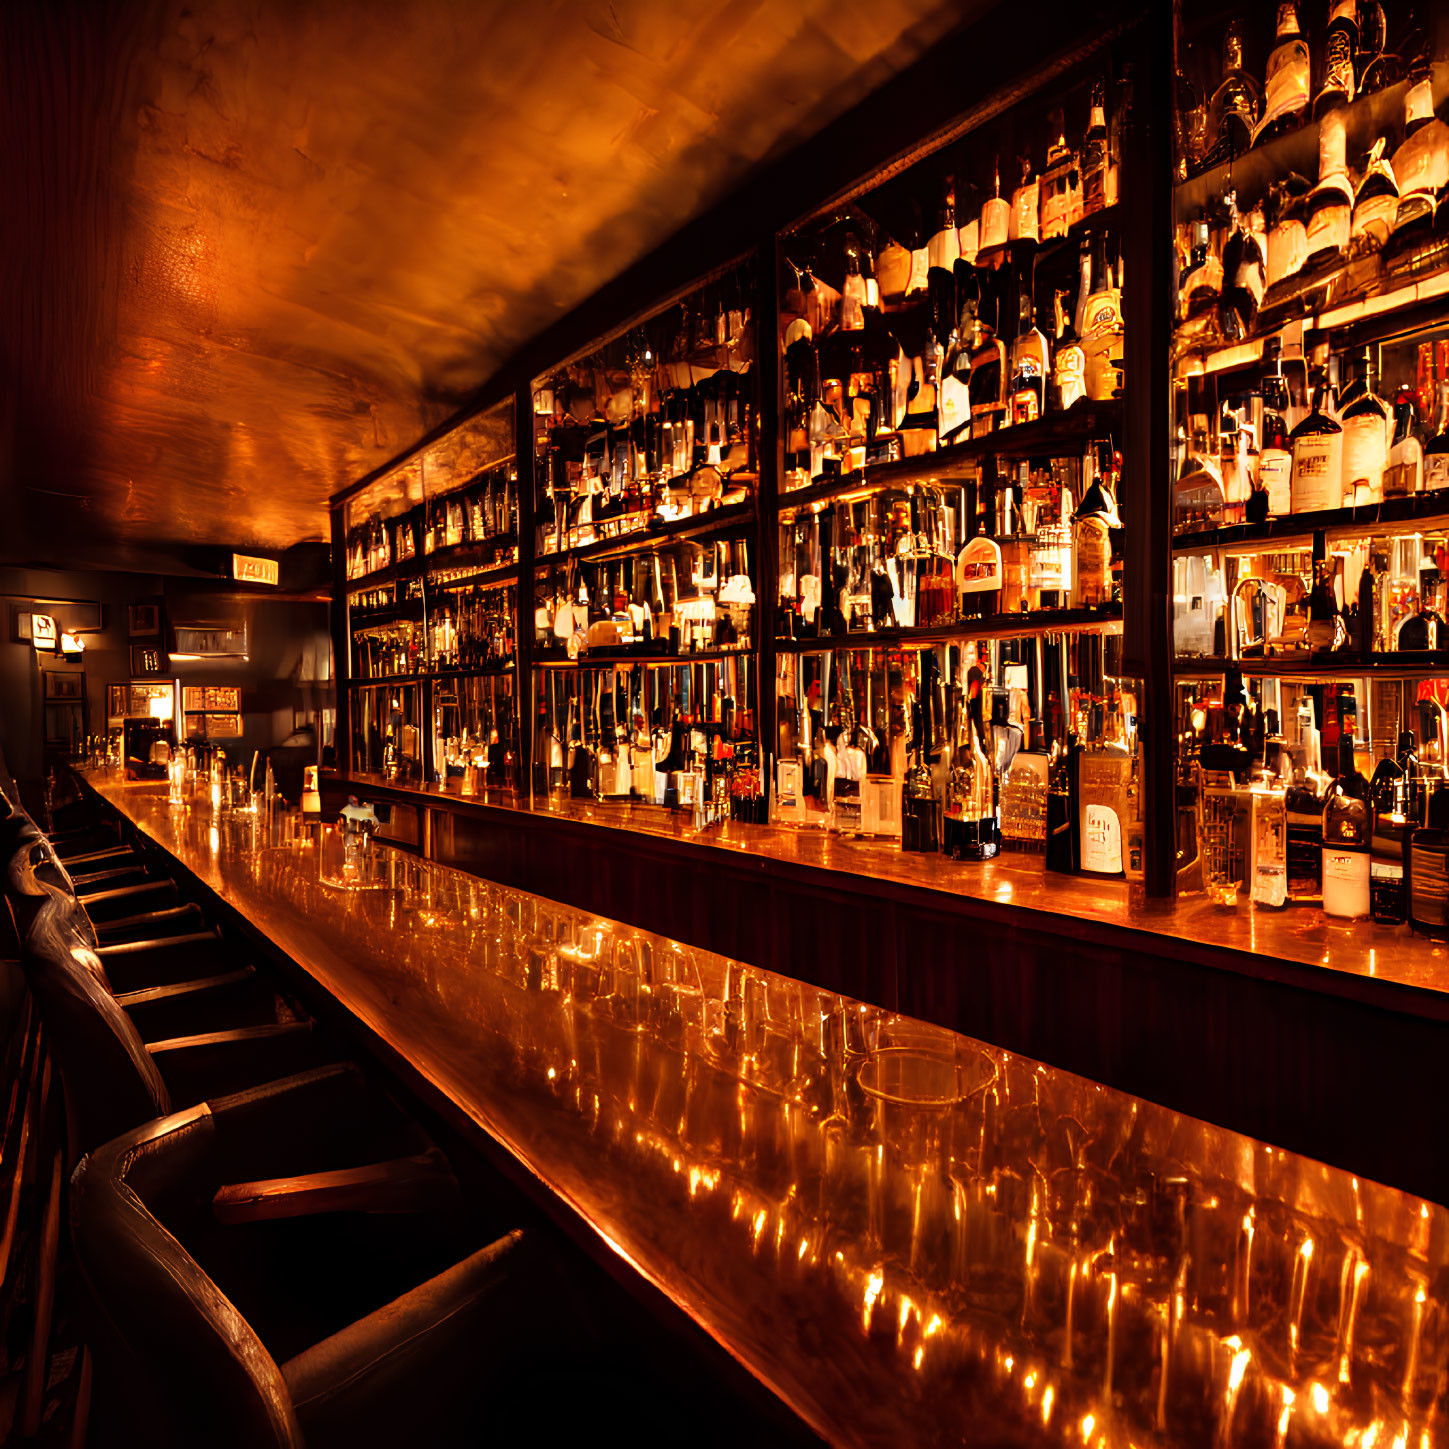 Inviting upscale bar with backlit shelves and wooden counter